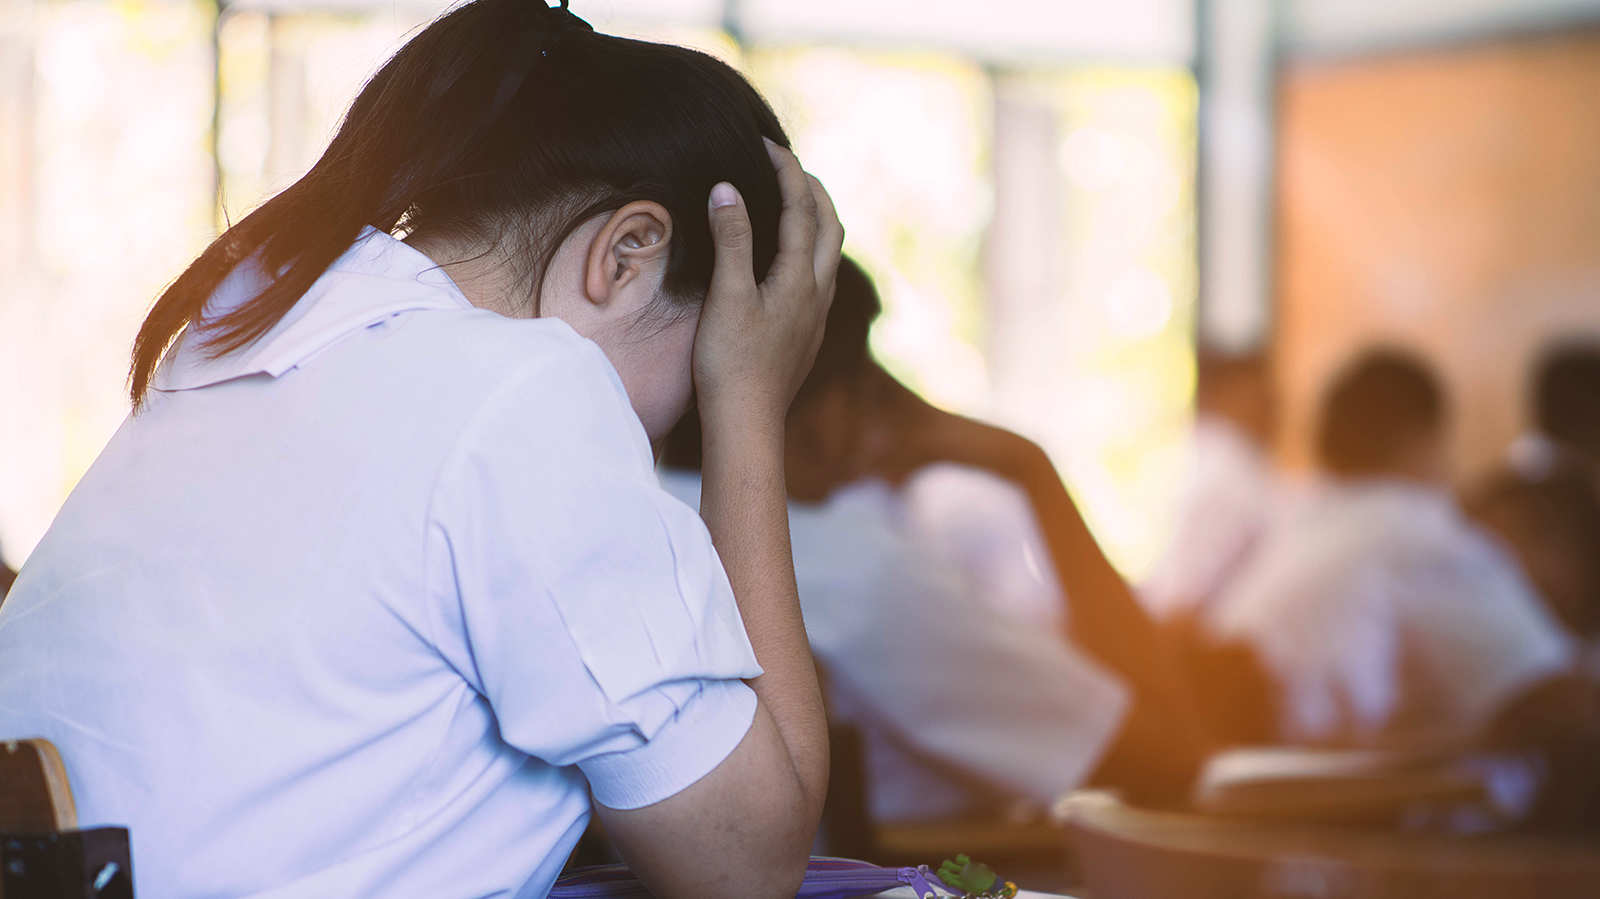 My low PSLE score didn’t just make me feel like a failure. It pained my father too